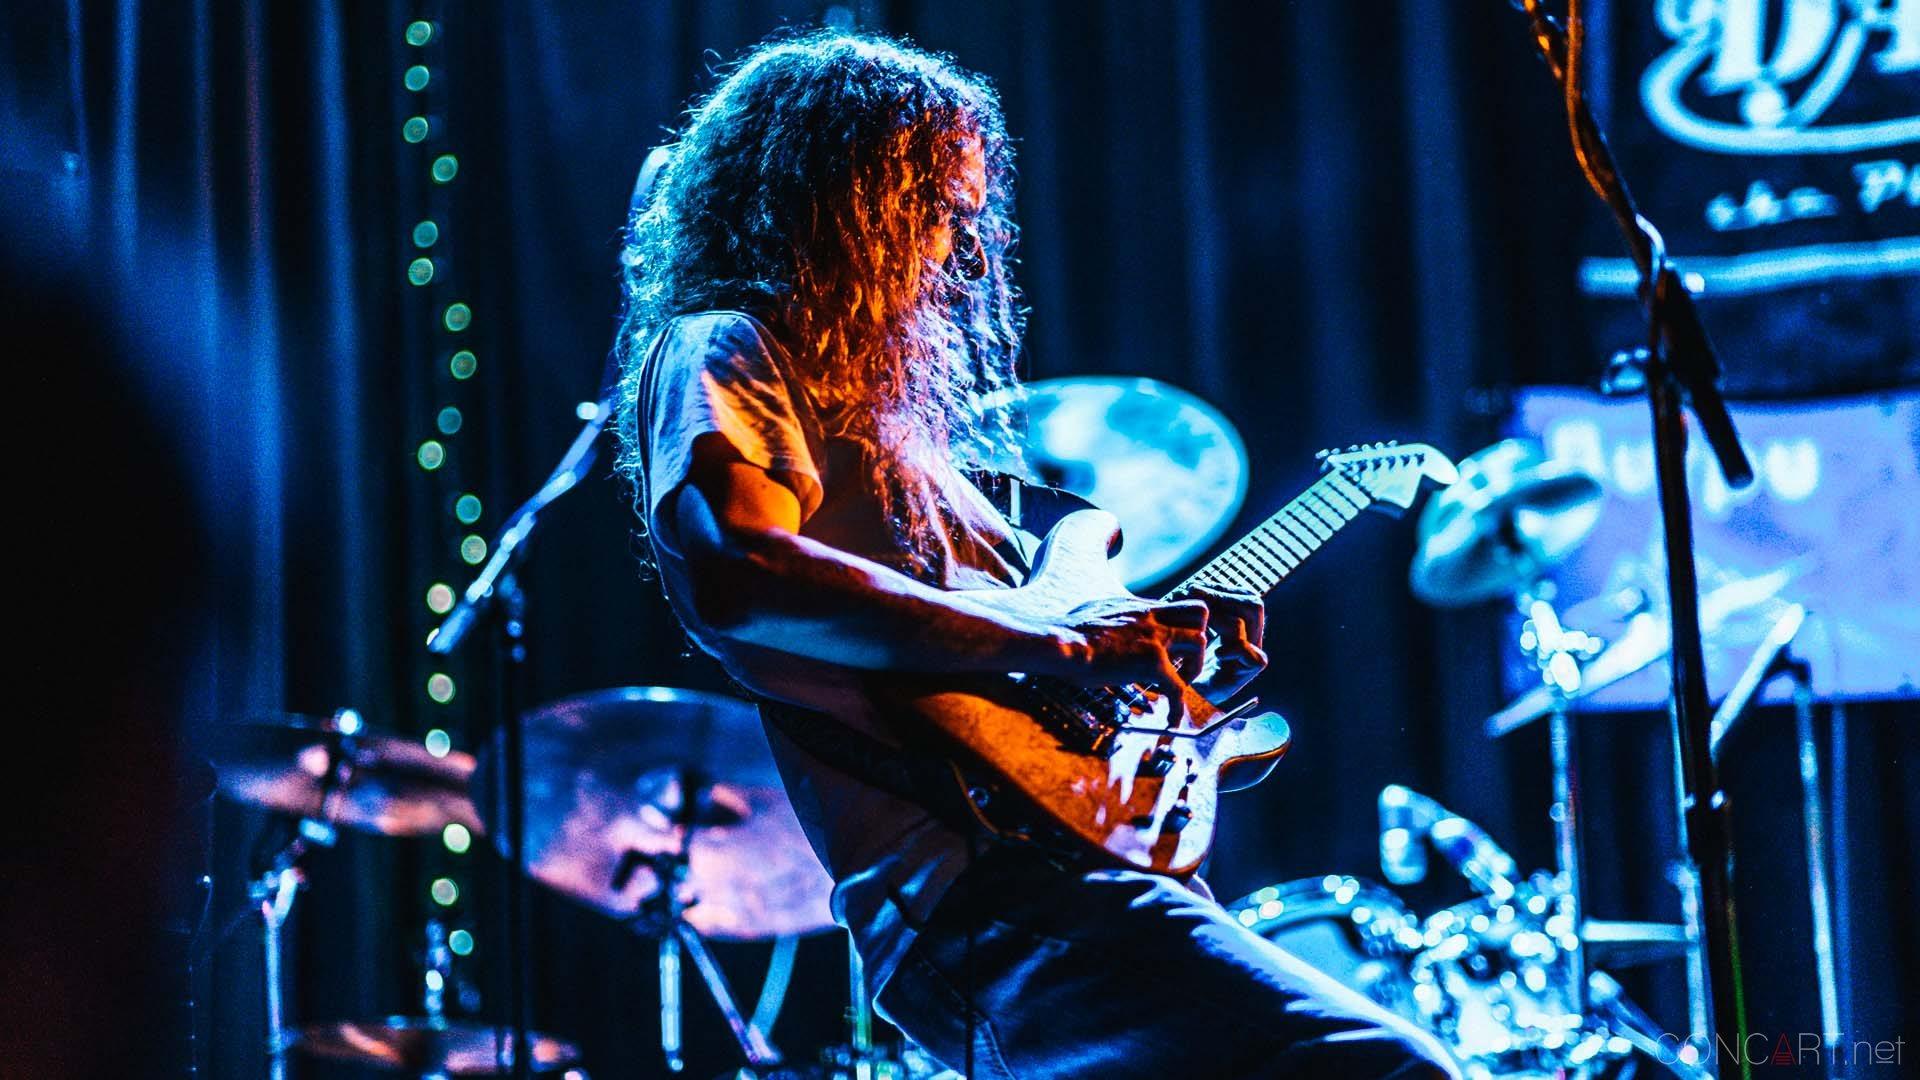 Hard Rock Cafe Will Be Hosting Guthrie Govan's India Tour